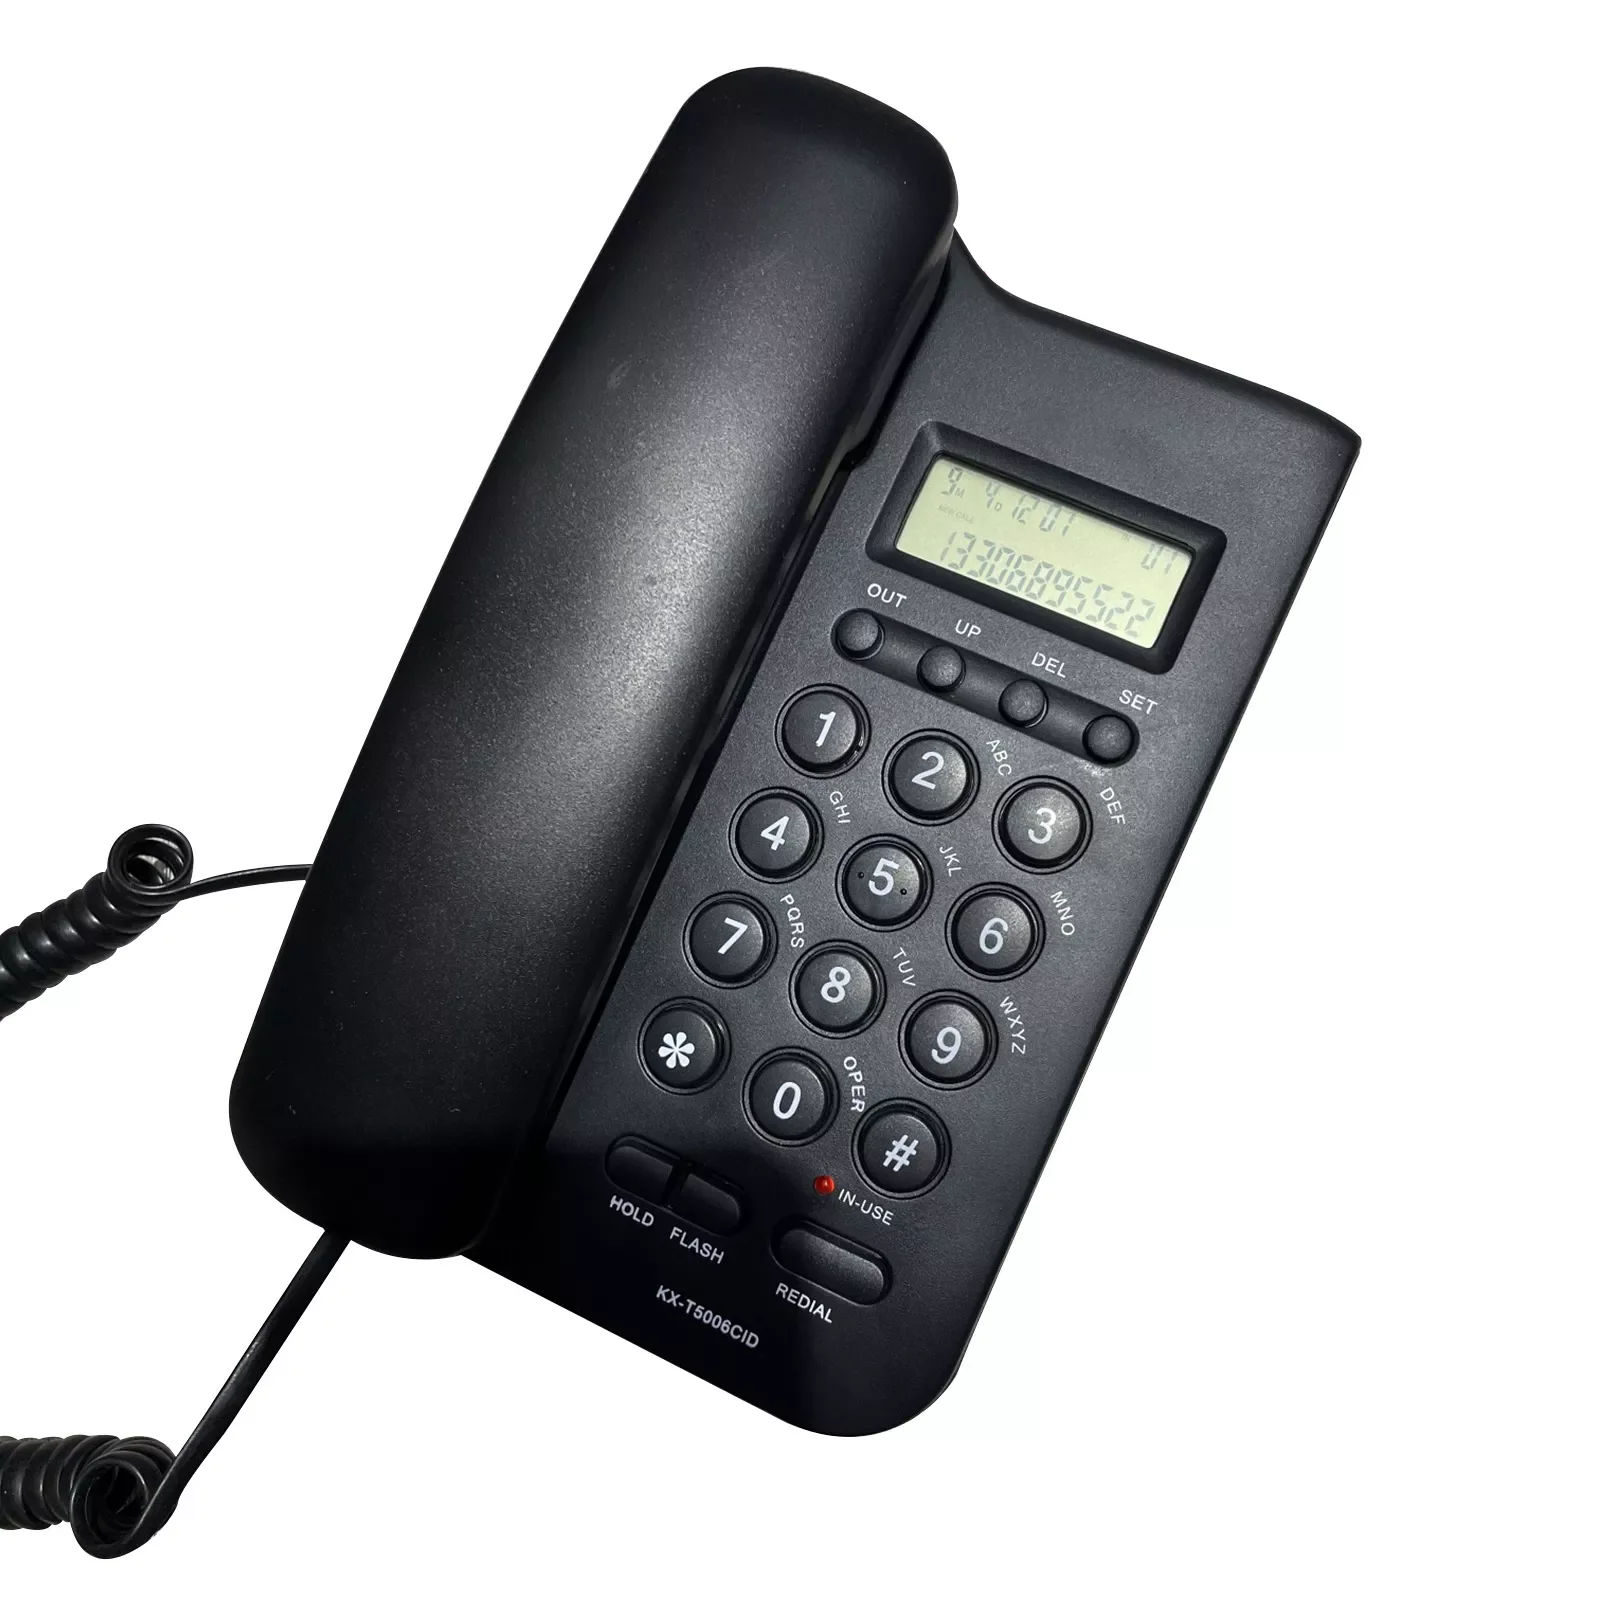 

KX-T5006CID Hotel Caller ID Hands Free Corded Telephone Loud Sound Home Office With Speaker Landline Wall Mounted FSK DTMF